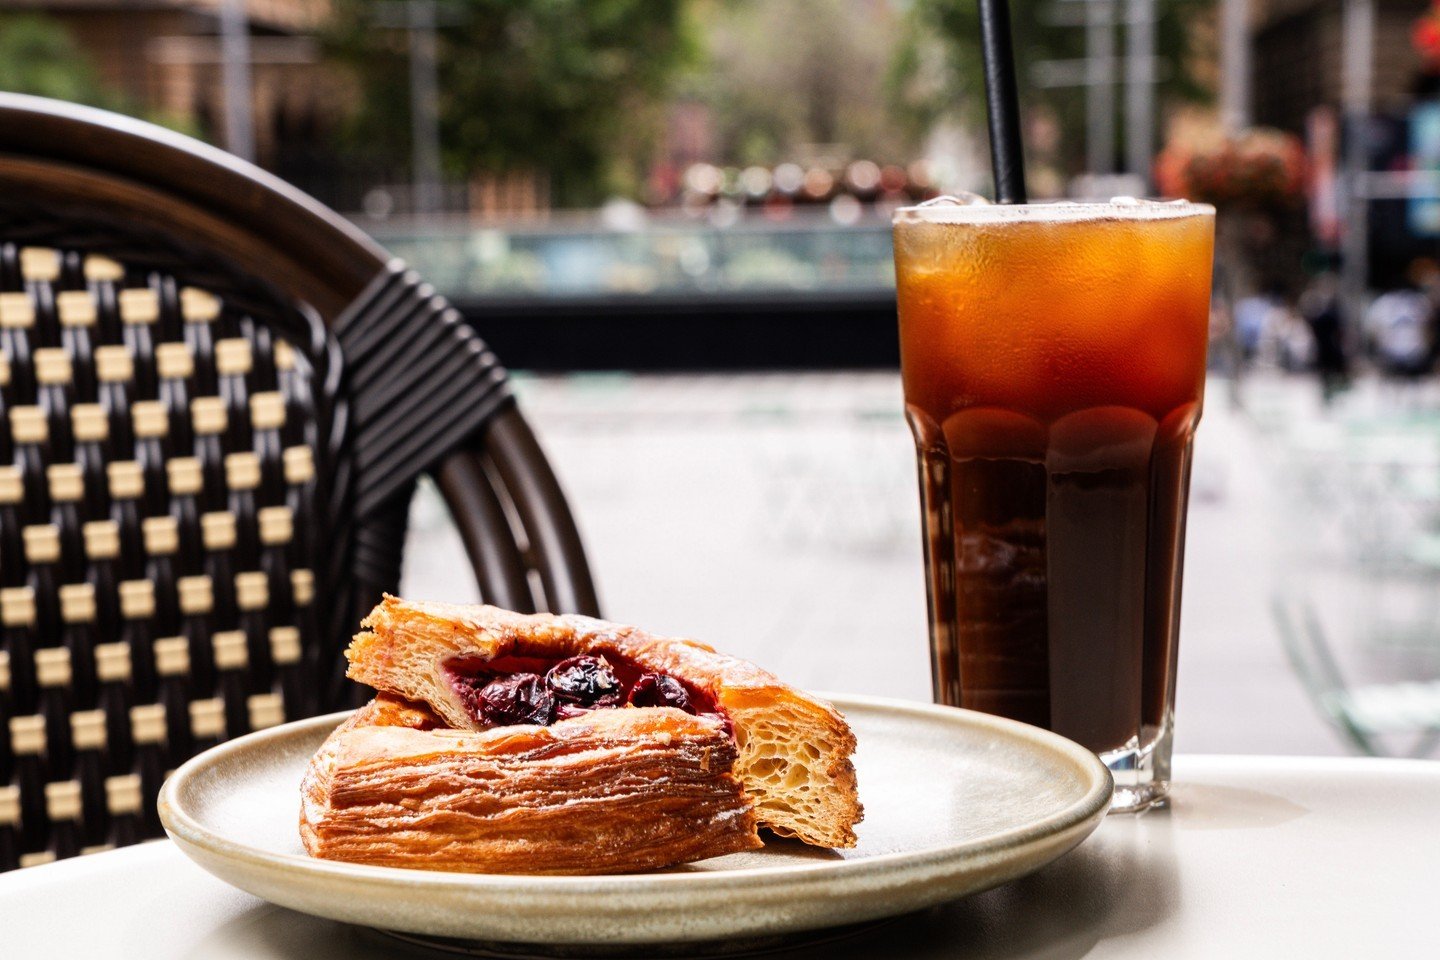 Coffee &amp; Pastries are always a good idea&hellip; especially when it&rsquo;s from Caffeine Cartel 🙌

Visit us at 32 Martin Place today!